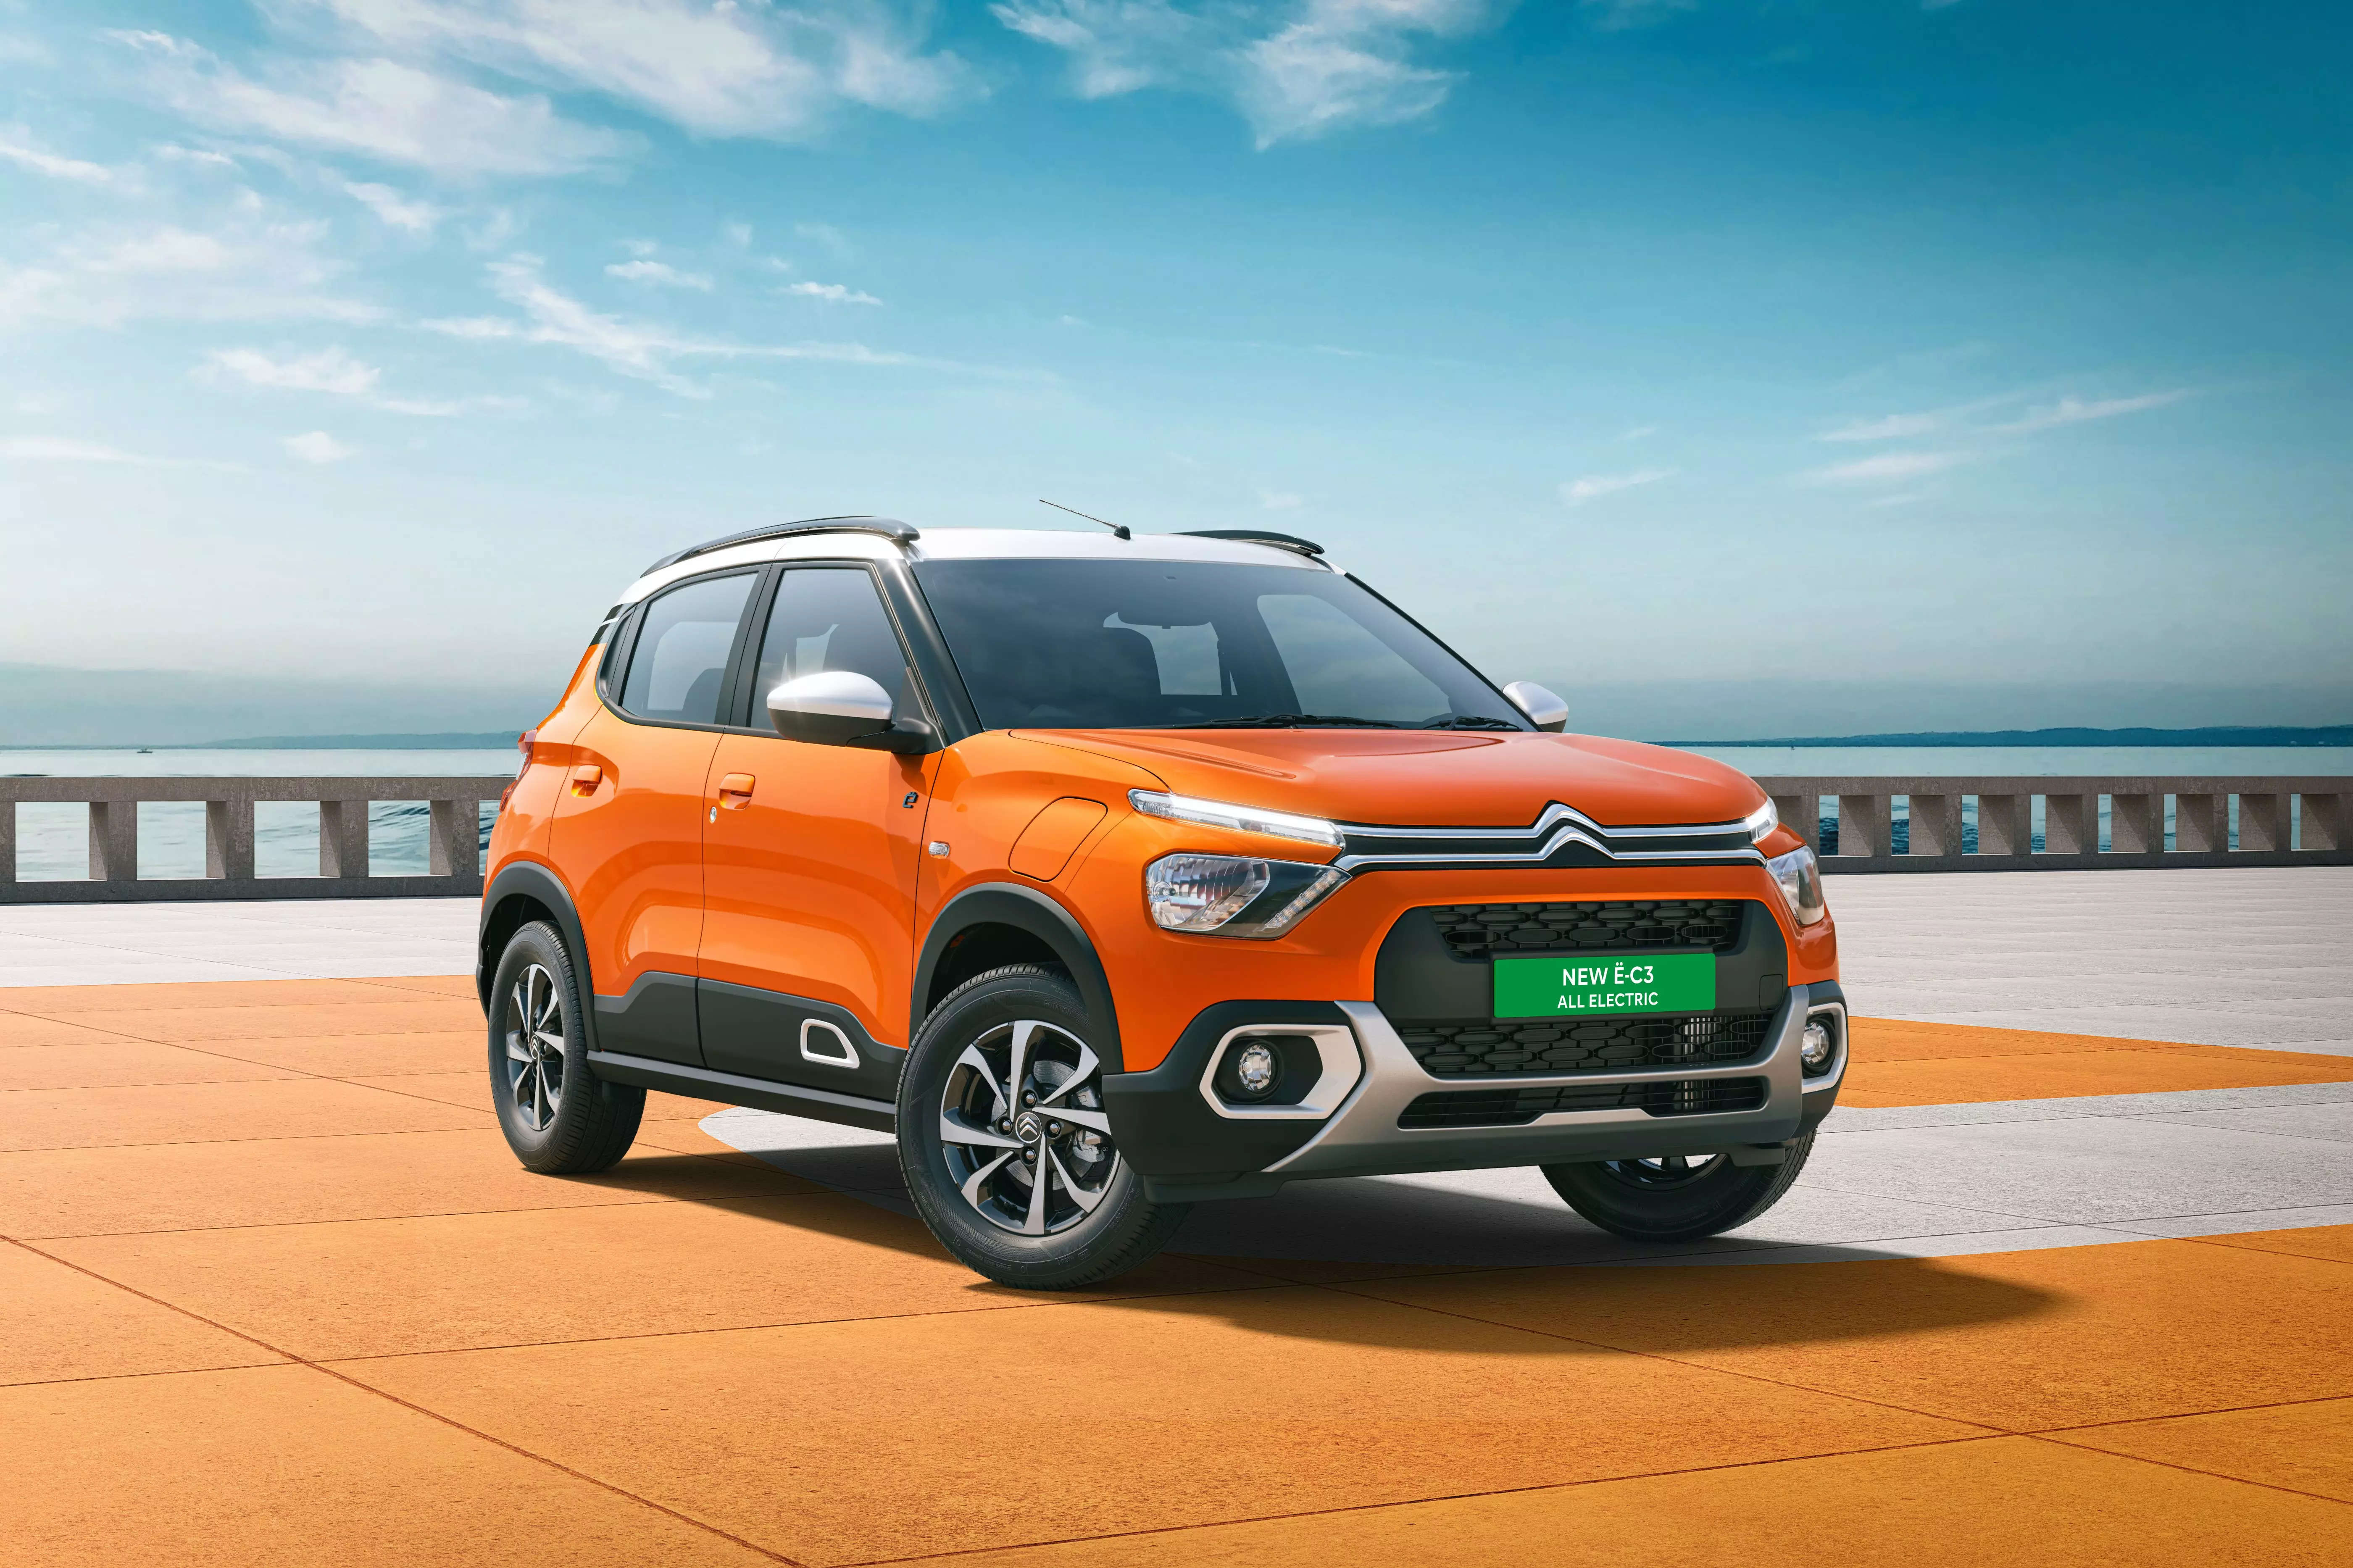 Citroën India E-C3 all-electric at an introductory price INR 11.5 lakh, ET